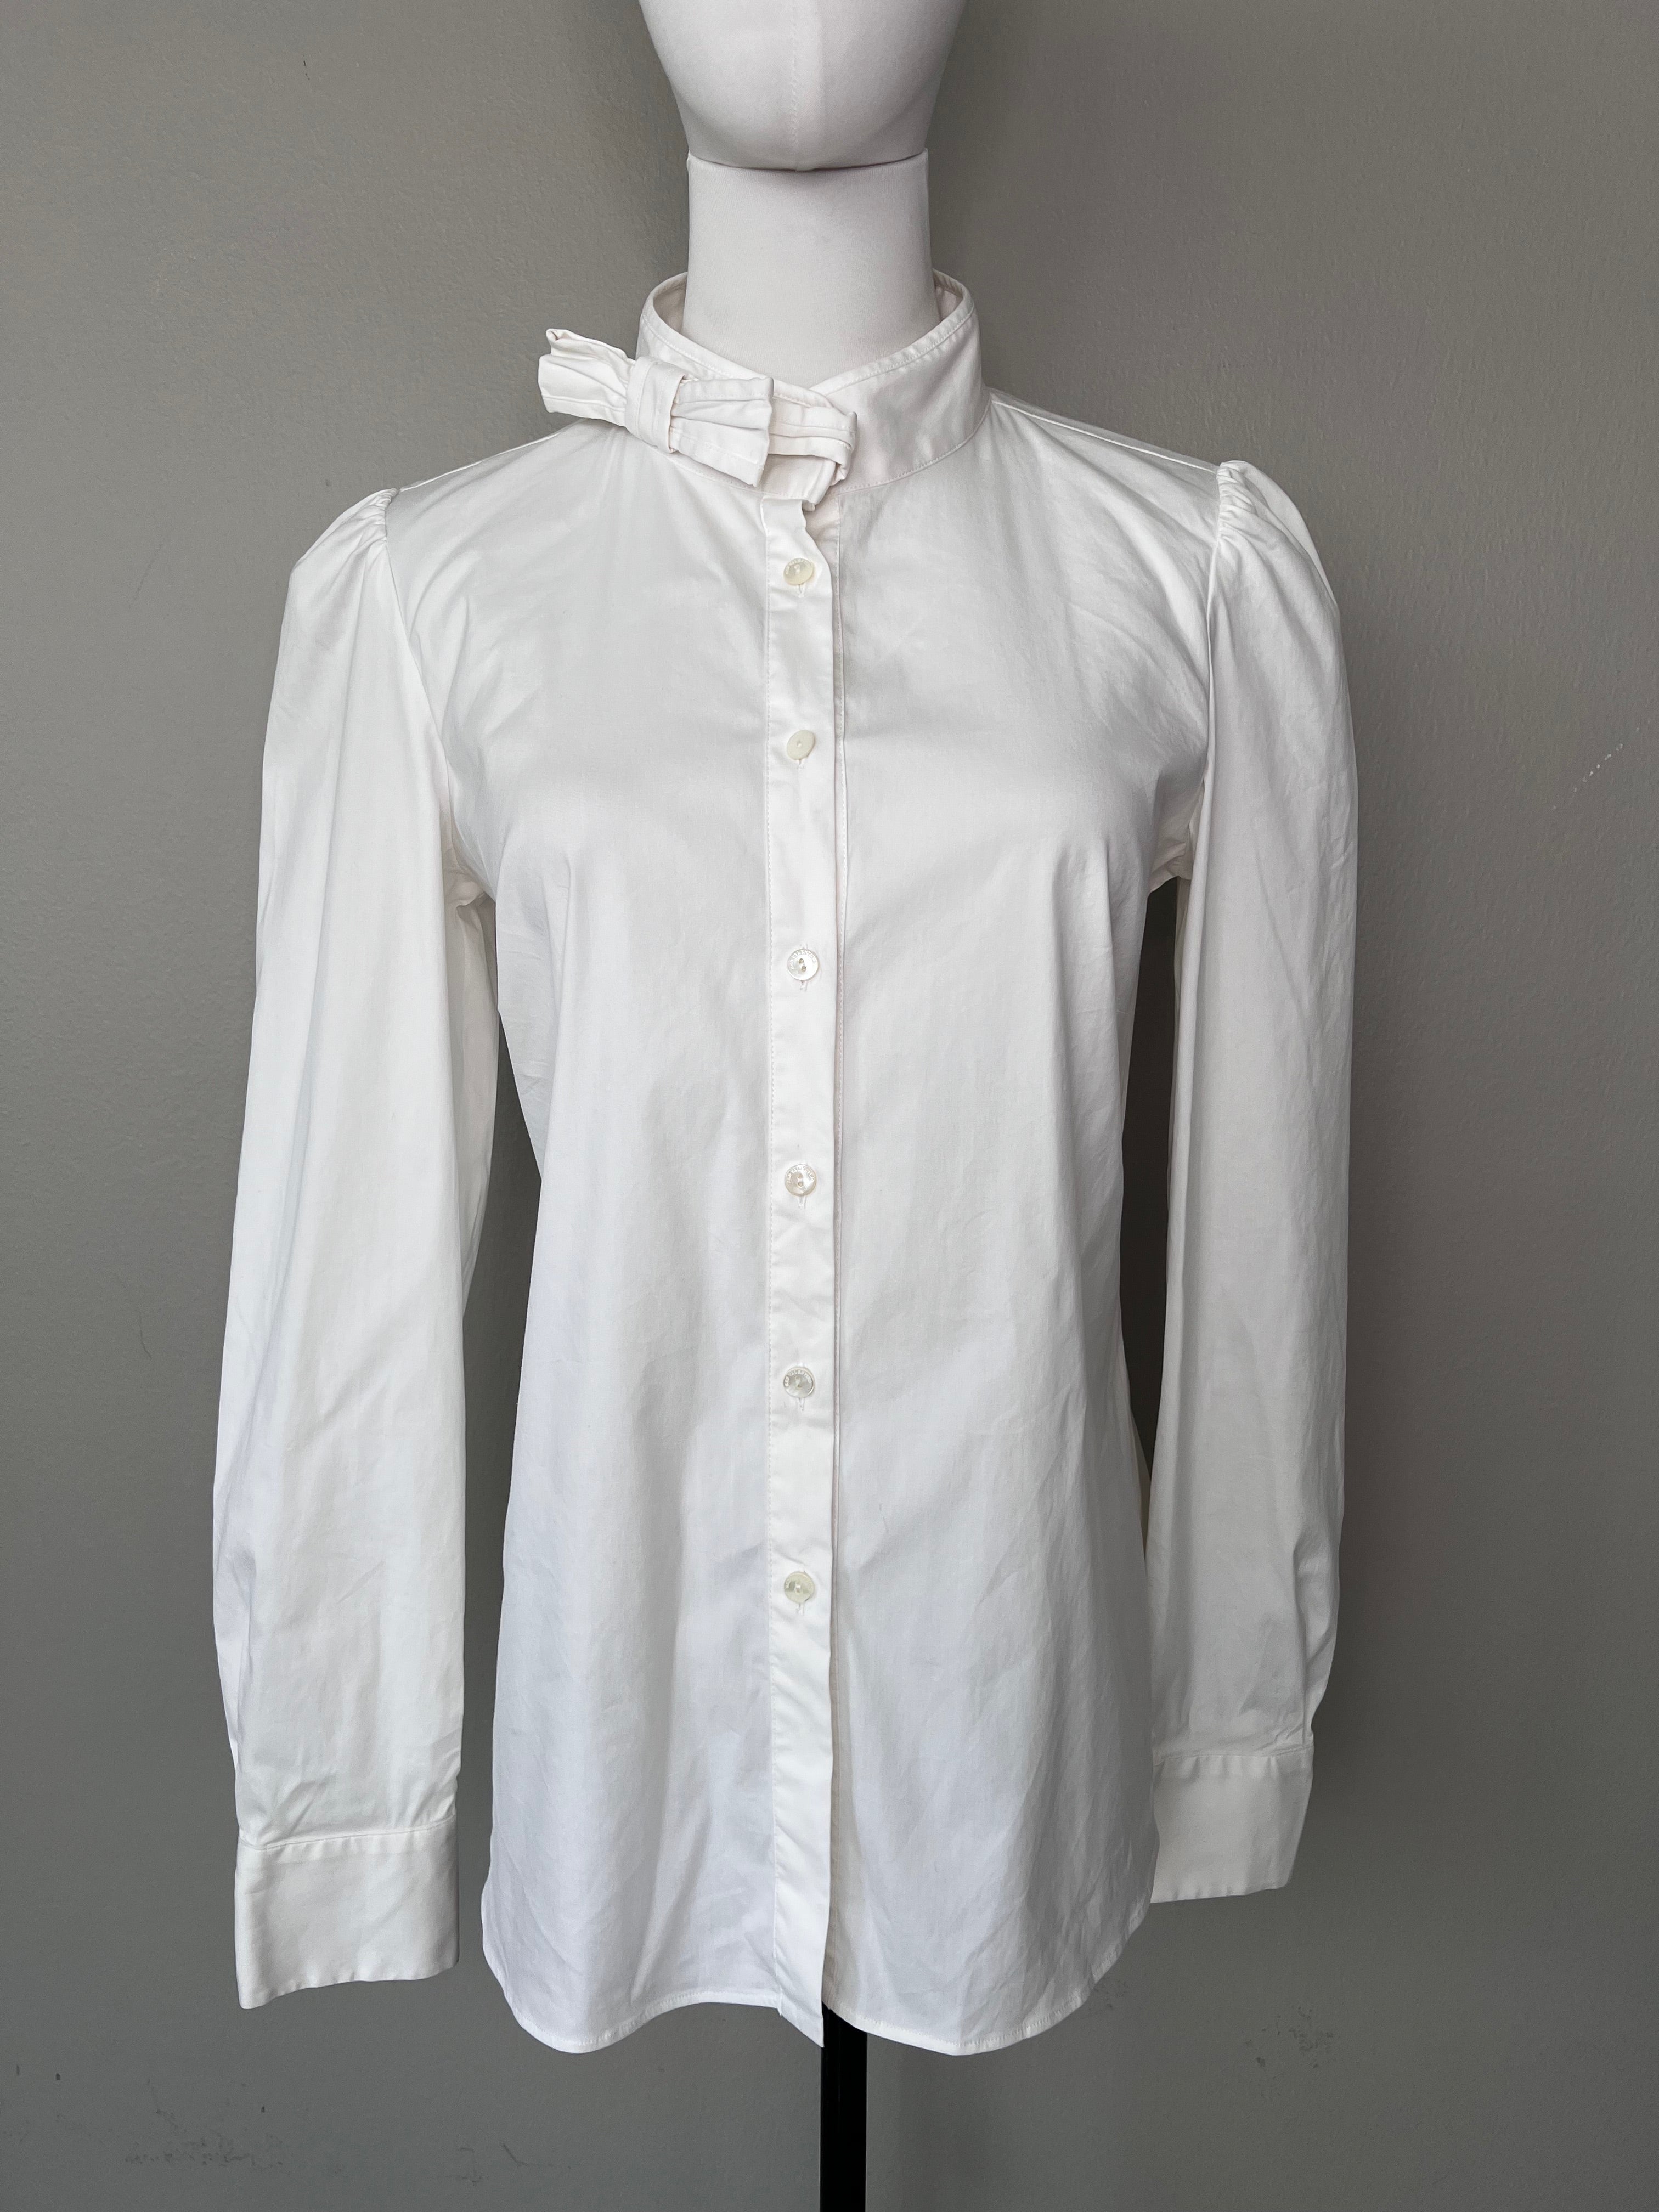 White cotton button-down blouse with bow detailing at collar.- RED VALENTIINO